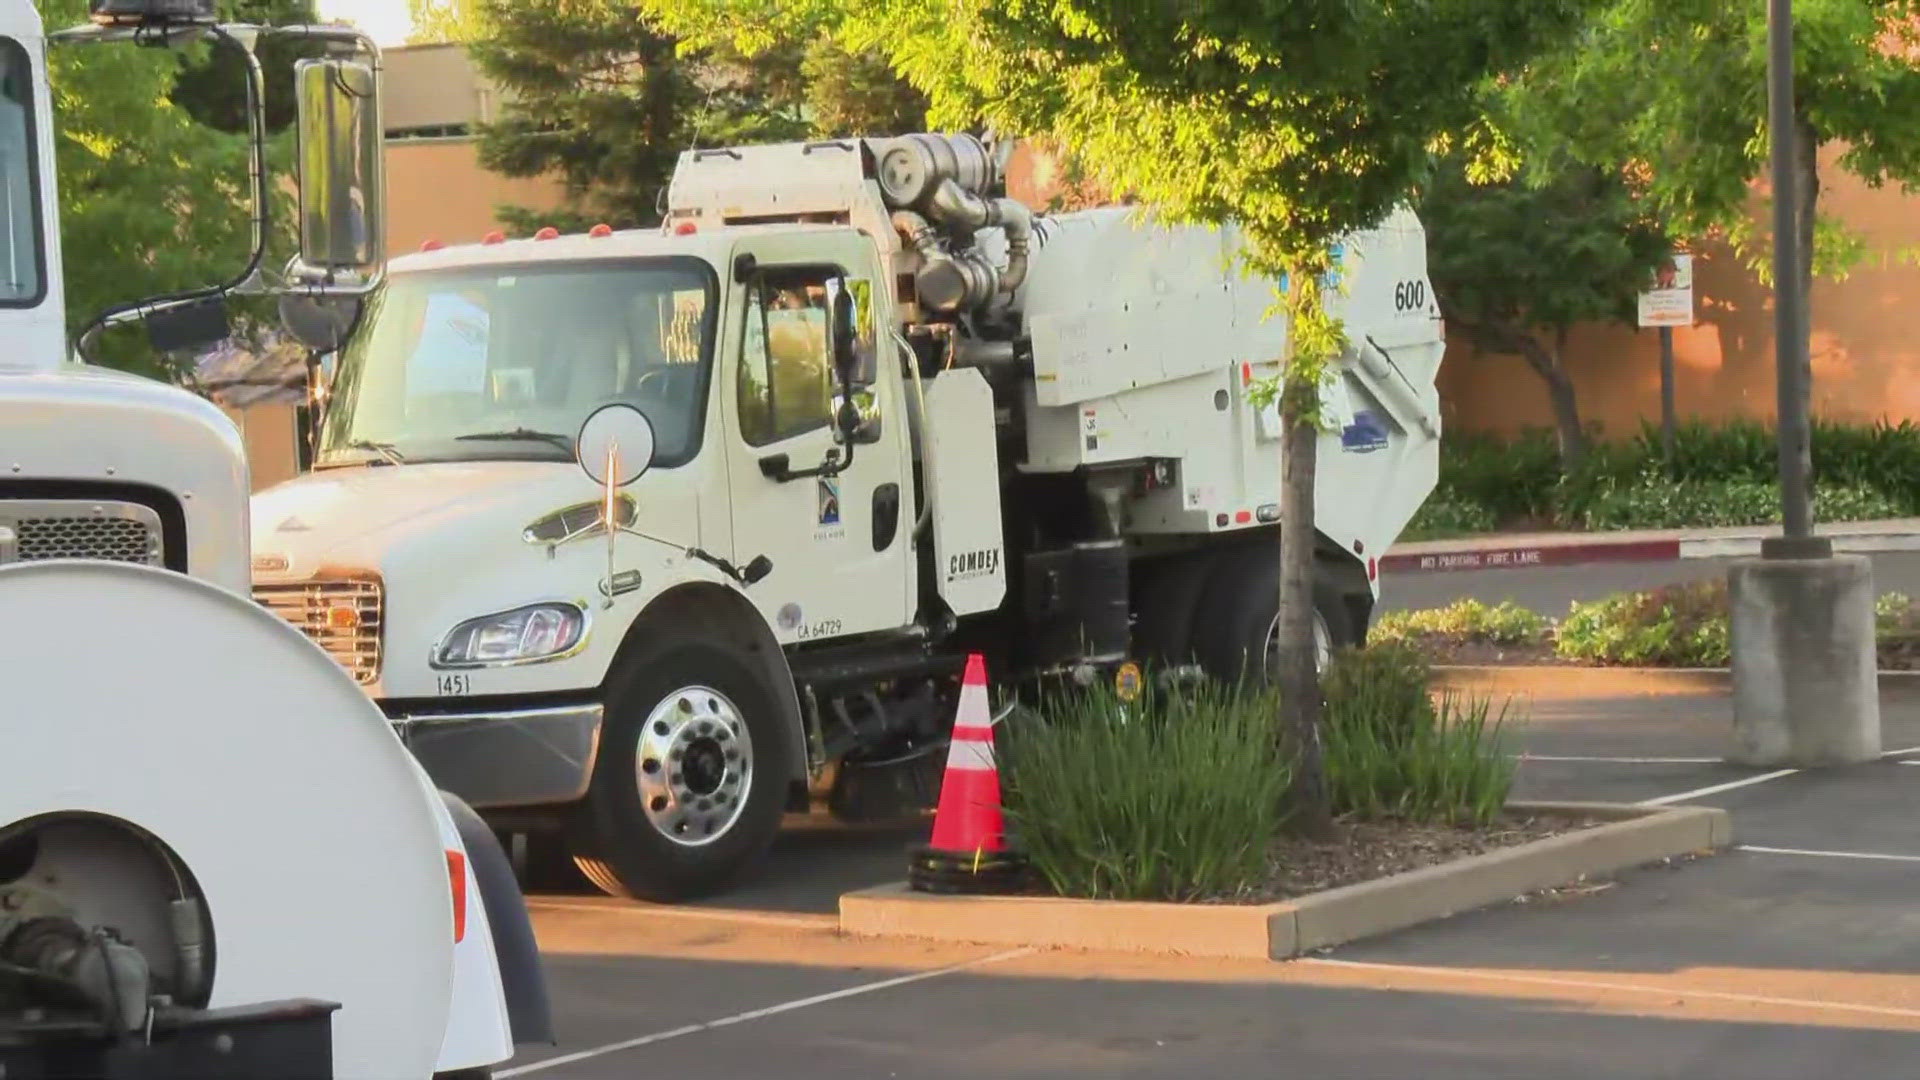 Sit in the driver’s seat of a Folsom garbage truck, climb aboard a fire engine, meet local police officers, and more at Folsom’s annual City Works Day on Wednesday.